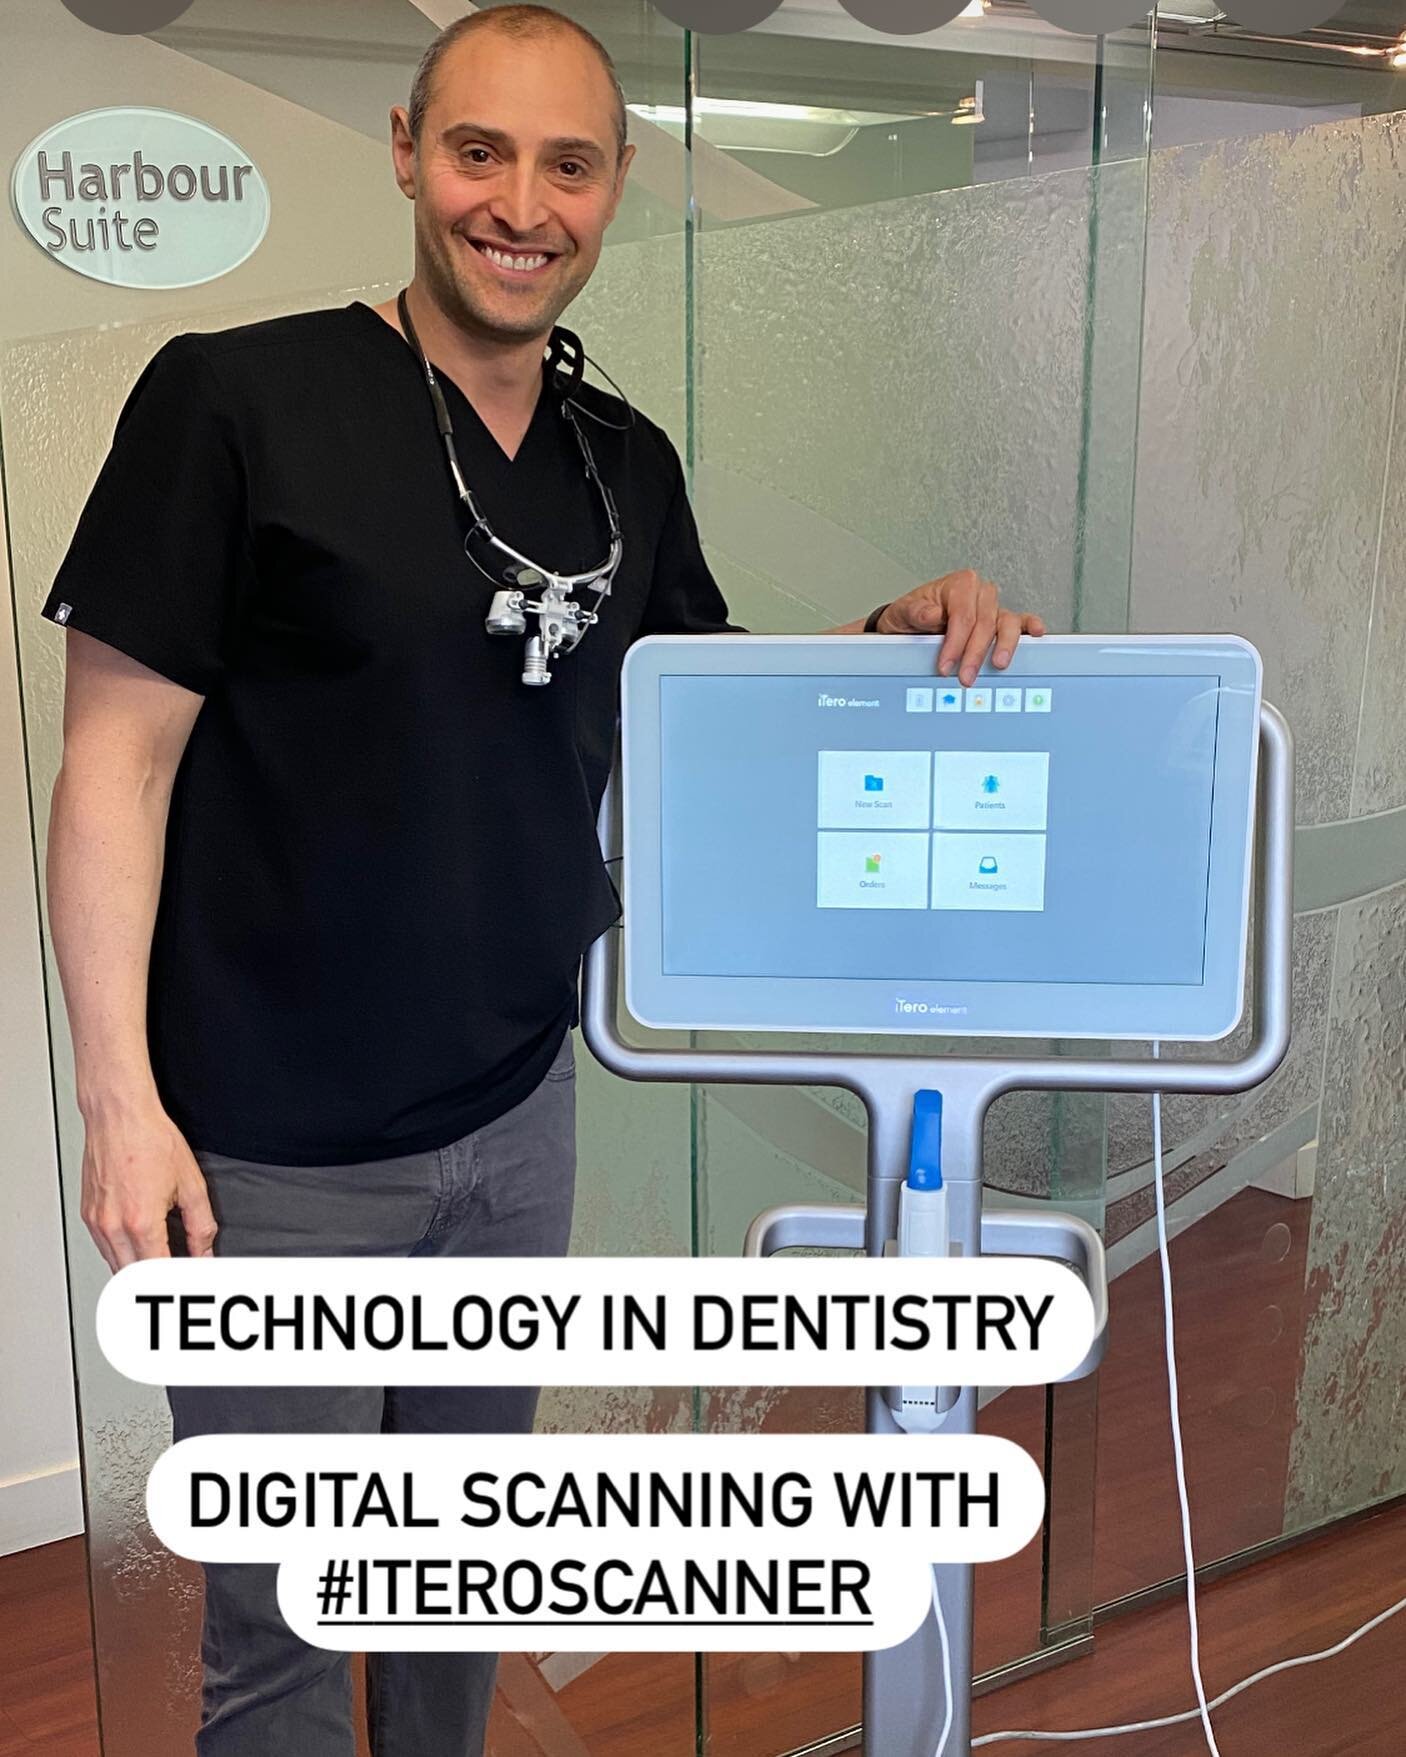 Cutting-edge technology!

We are always looking for ways to implement new technology to improve patient experience and outcomes.  We&rsquo;ve done that with the #itero scanner.

See your teeth like you&rsquo;ve never seen them before - education, dig